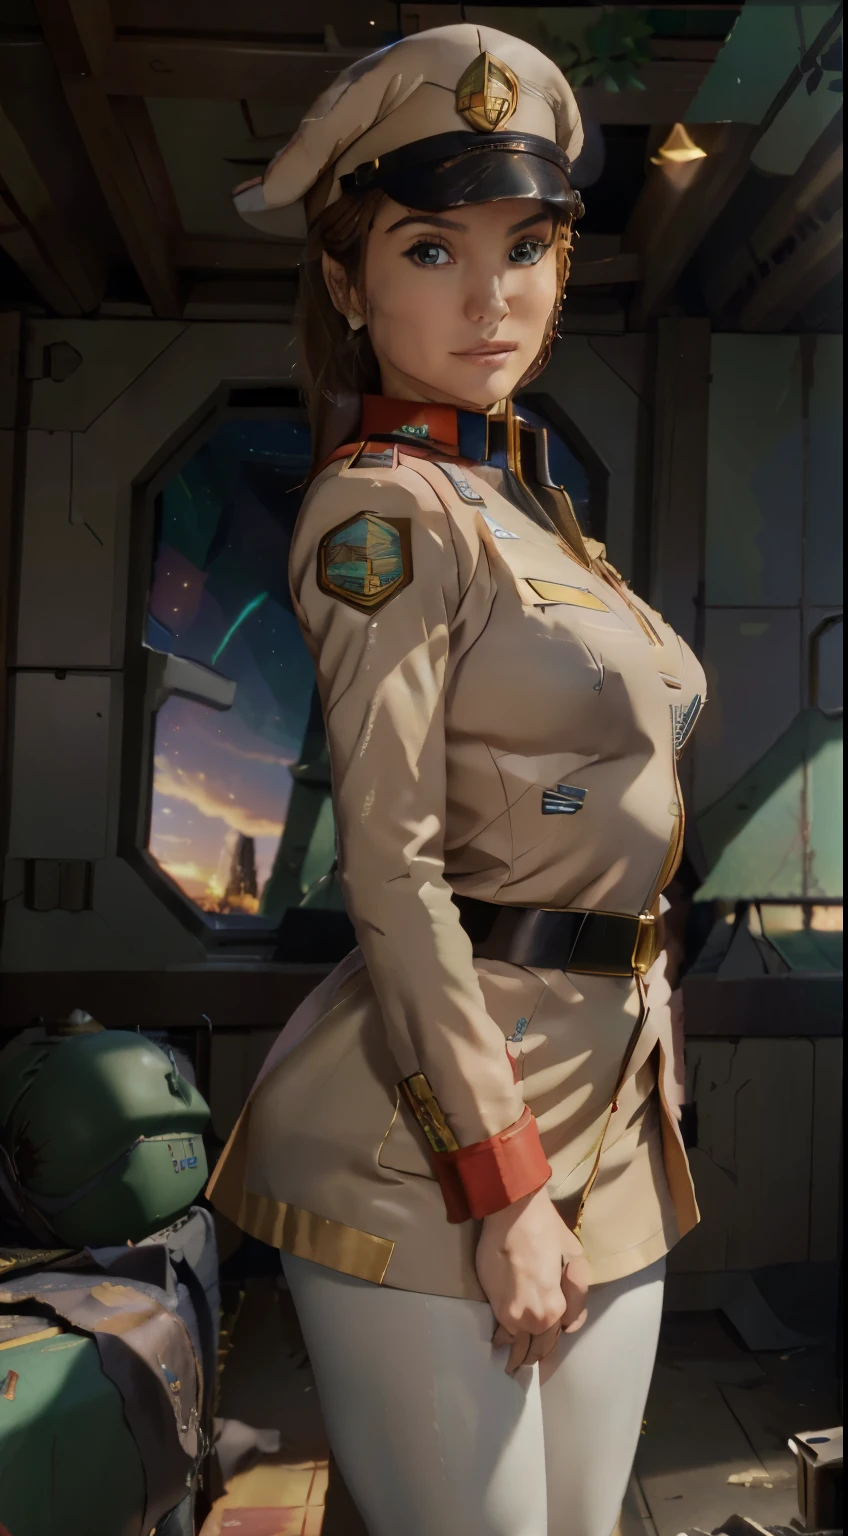 (((masterpiece,highest quality,In 8K,Super detailed,High resolution,anime style,absolutely))),17 years old、beautiful girl、A female officer of the Earth Federation Forces is standing,(alone:1.5),((ten huts:1.5)),(((seriously;1.5))),(((Salute with your right hand;1.5))),(((stretch your left hand straight:1.5))),(Angelina Jolie:1.5),(((The background is a military base 1.5))),((sunset:1.5)),((blur background:1.5))),break (Wearing the uniform of the Earth Federation Forces:1.5),(wearing federal employee&#39;hat of:1.5),(Beautiful woman:1.5),(Detailed facial depiction:1.5),(wallpaper:1.5),(whole body:1.5),((overlook:1.5))